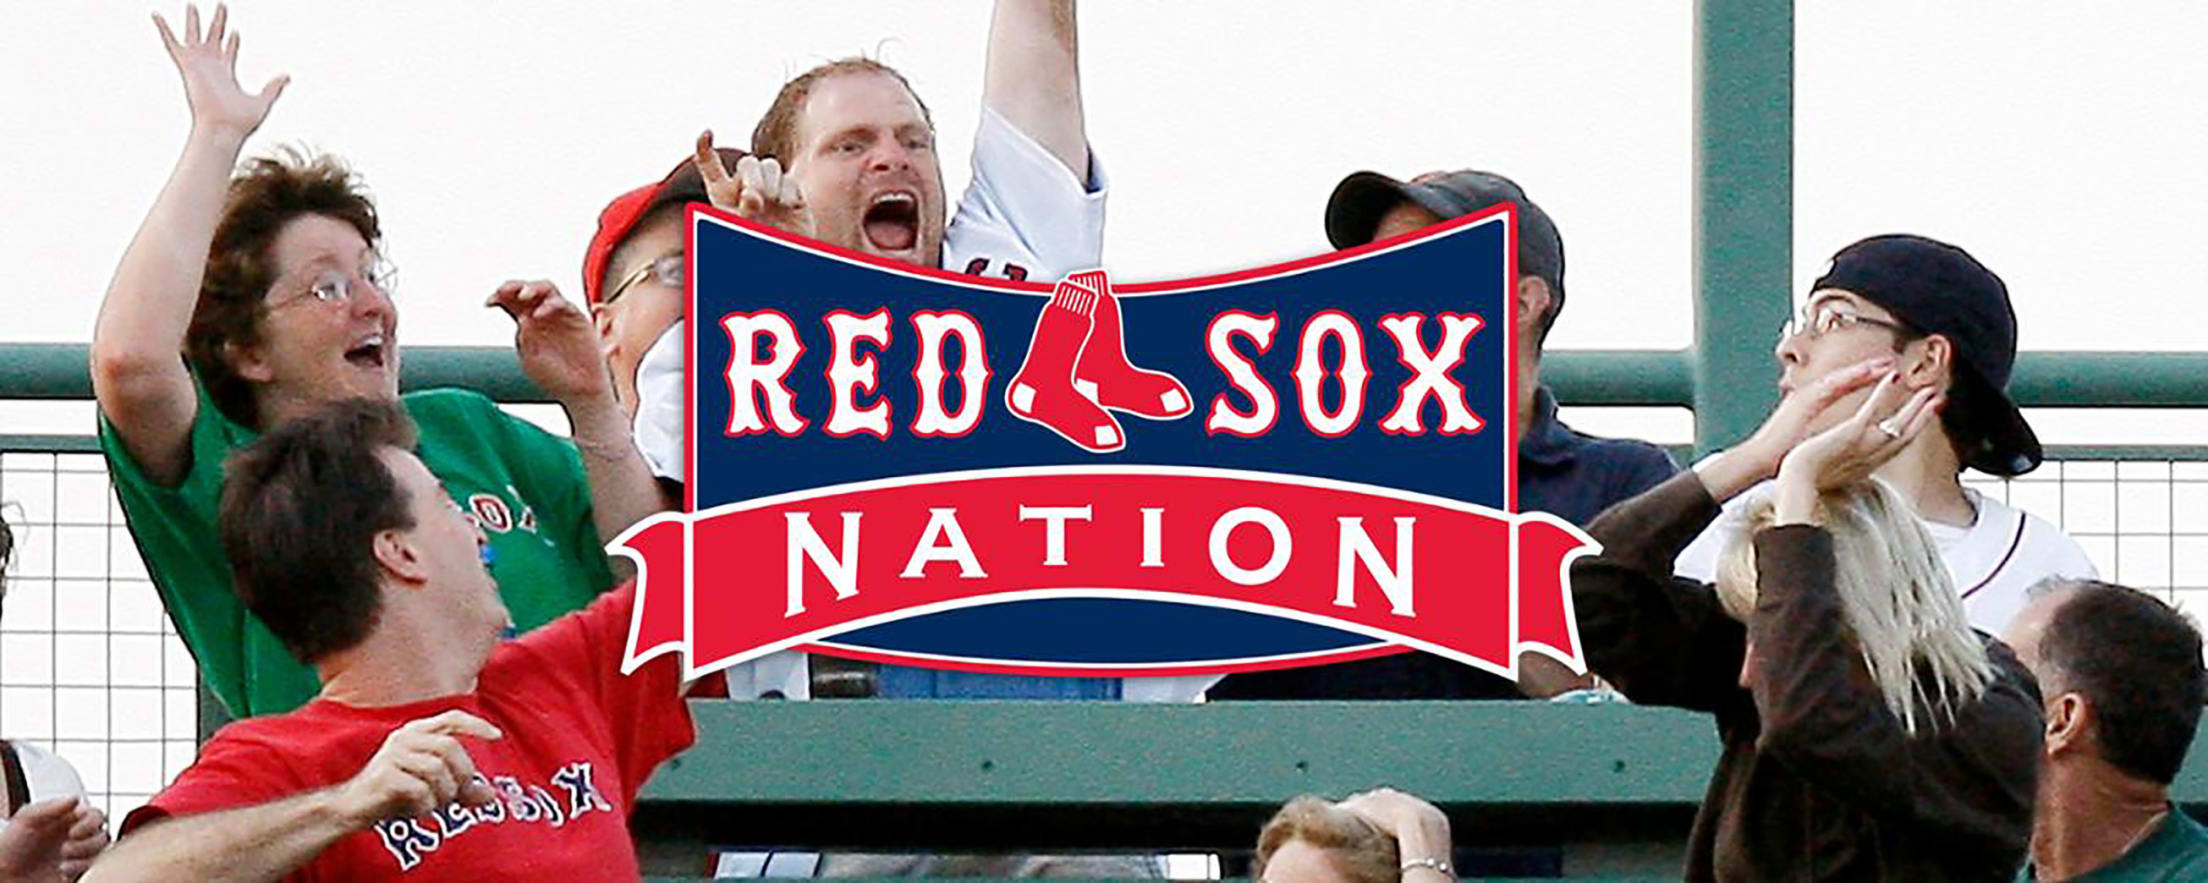 Entering New Jersey - Dirt Dogs - Boston Red Sox Nation